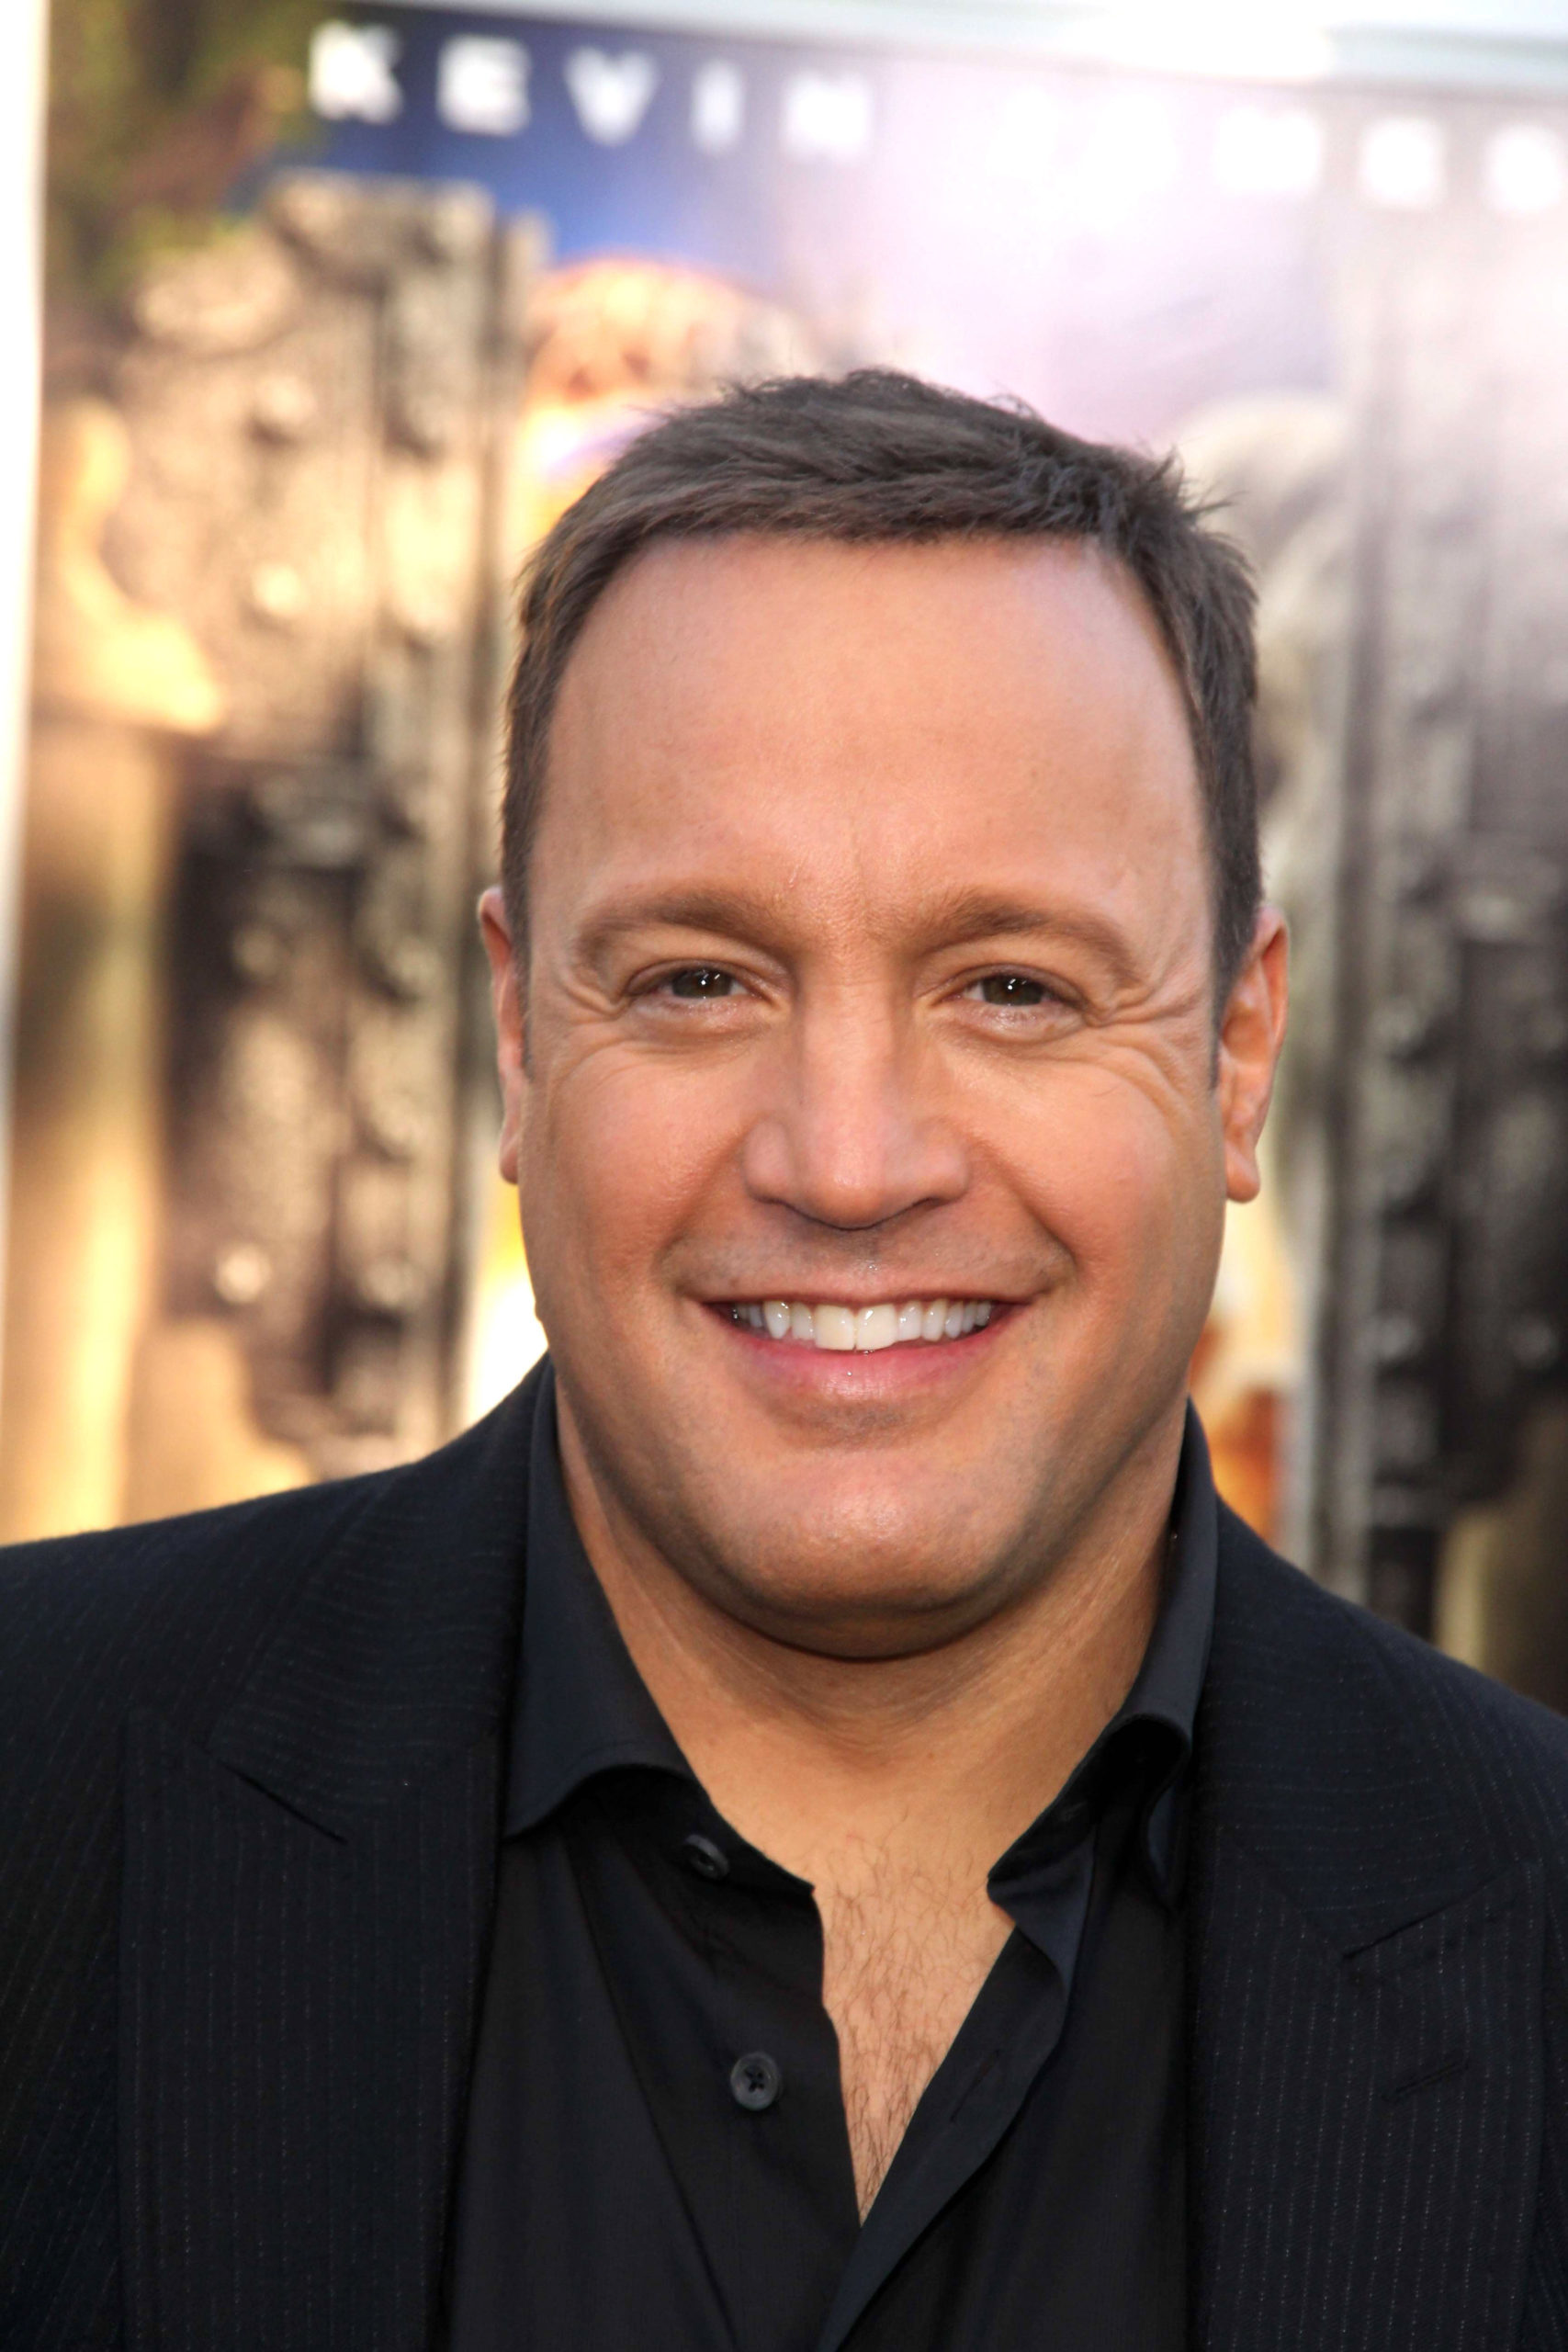 Kevin James lost more than 80 lbs while training for a movie